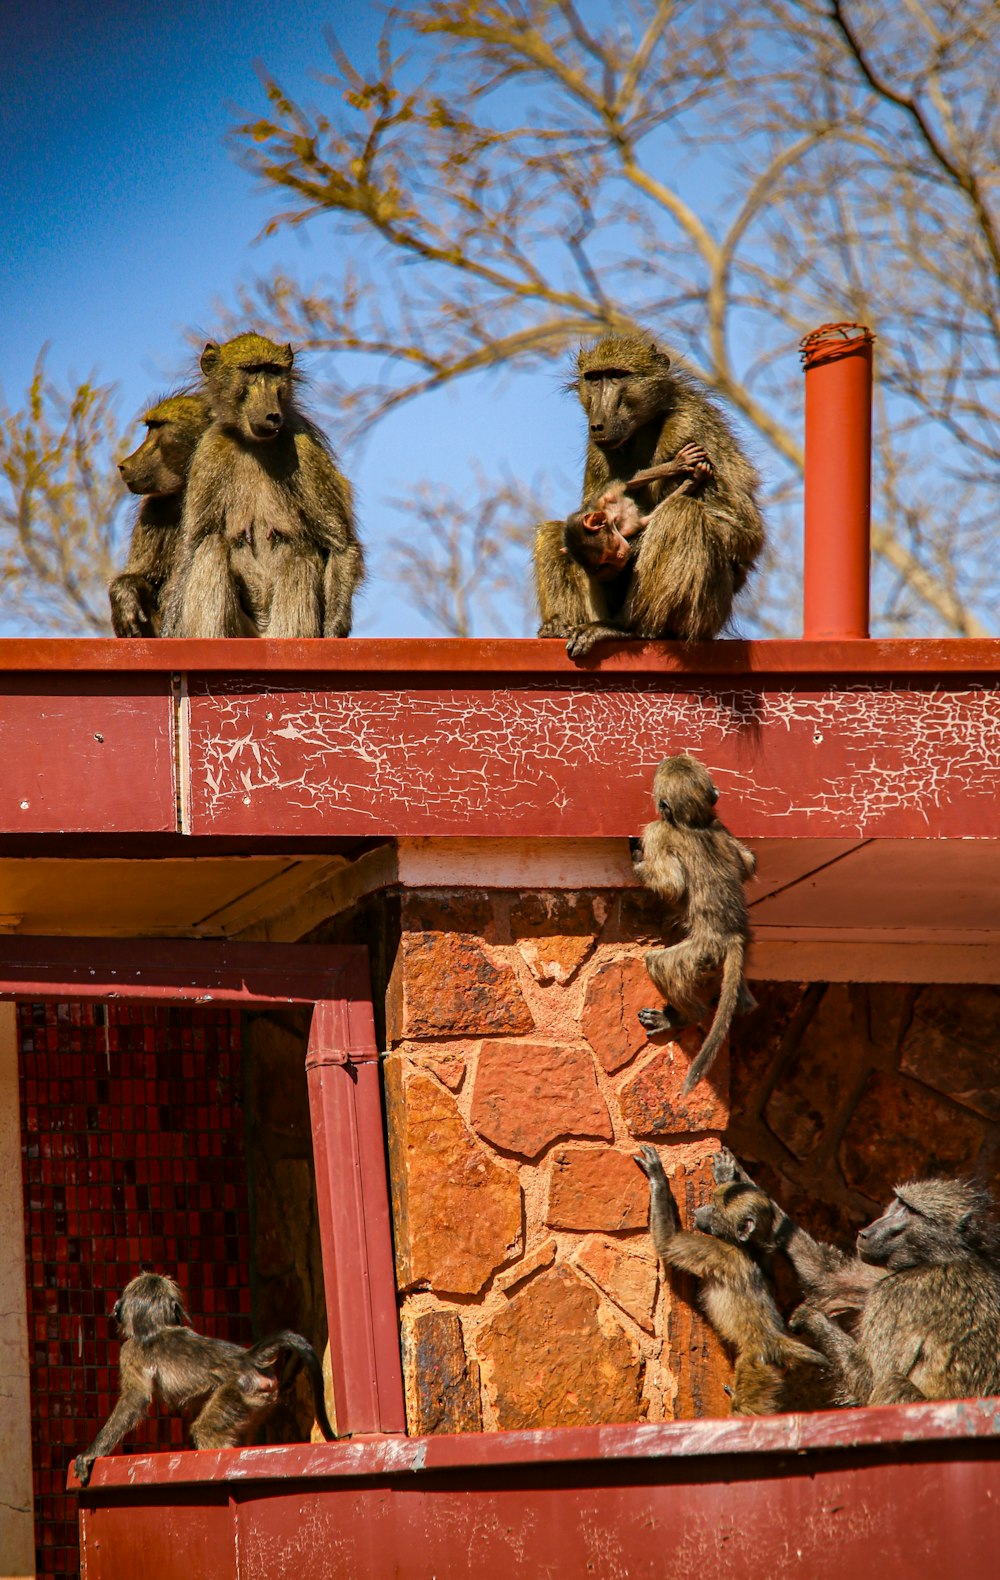 a group of monkeys sitting on top of a building